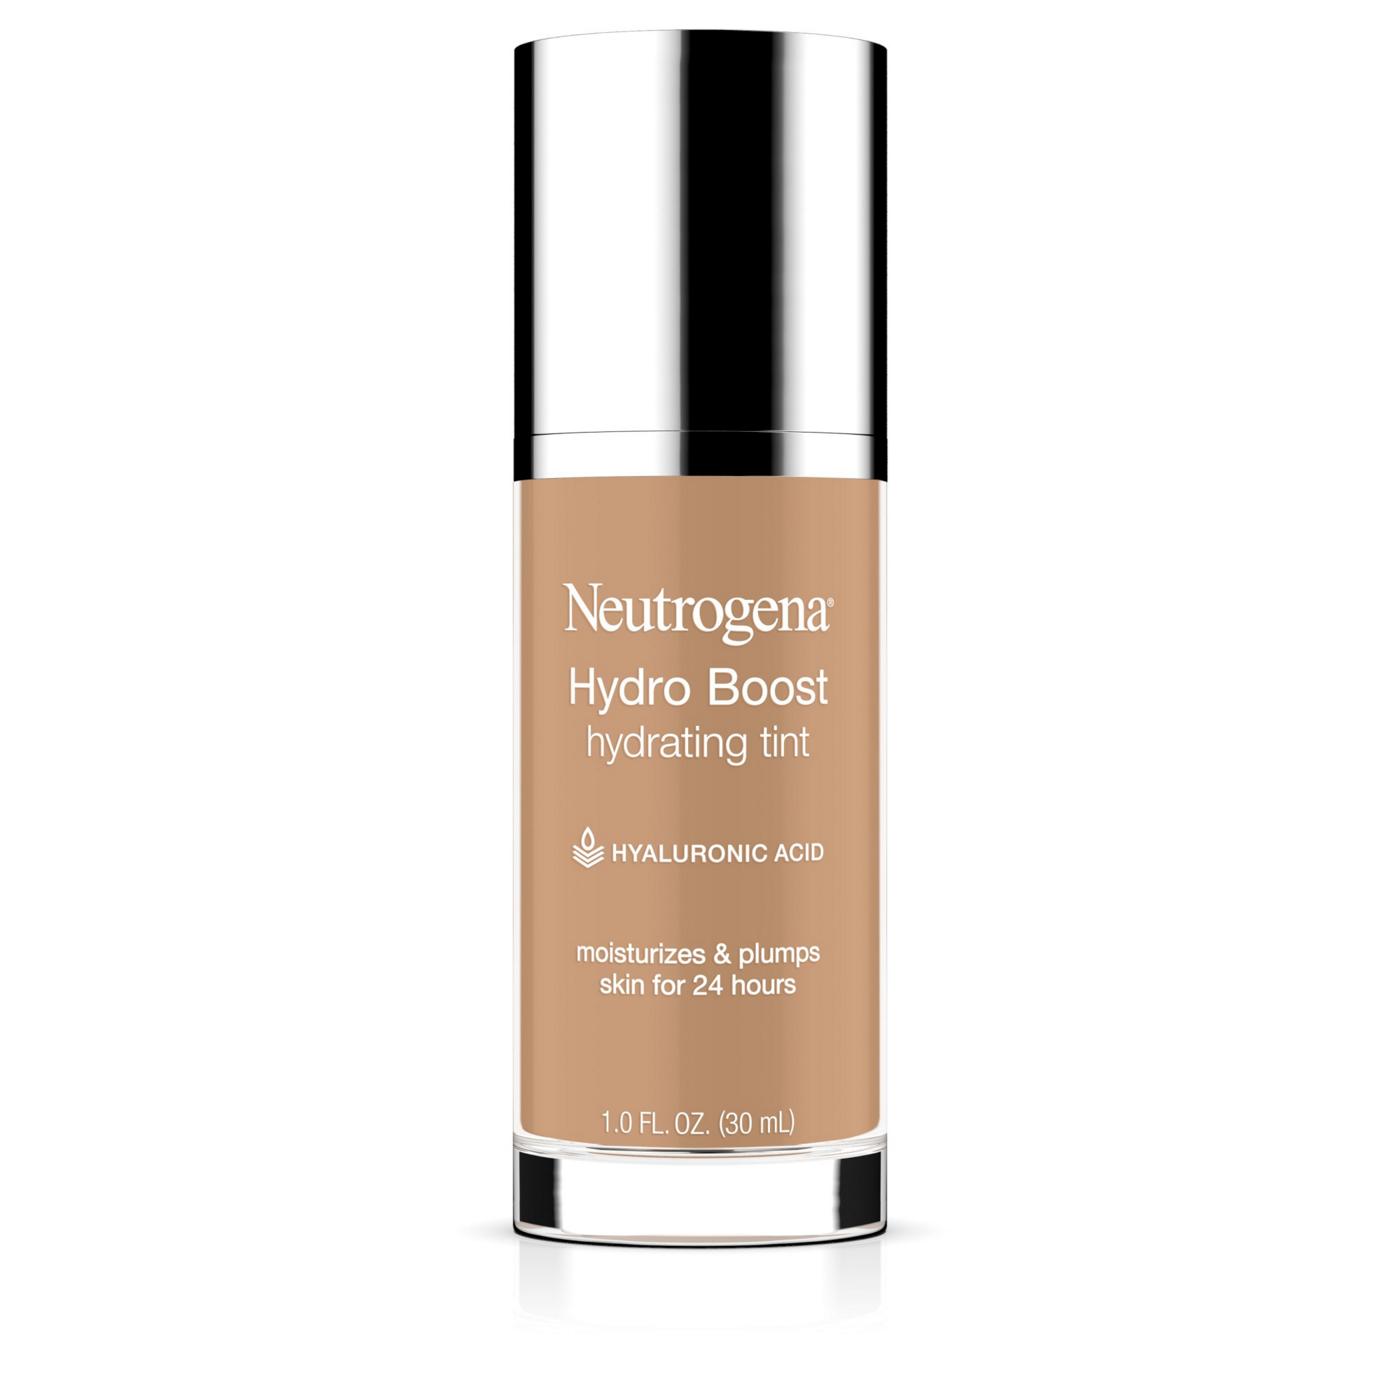 Neutrogena Hydro Boost Hydrating Tint 60 Natural Beige; image 1 of 6